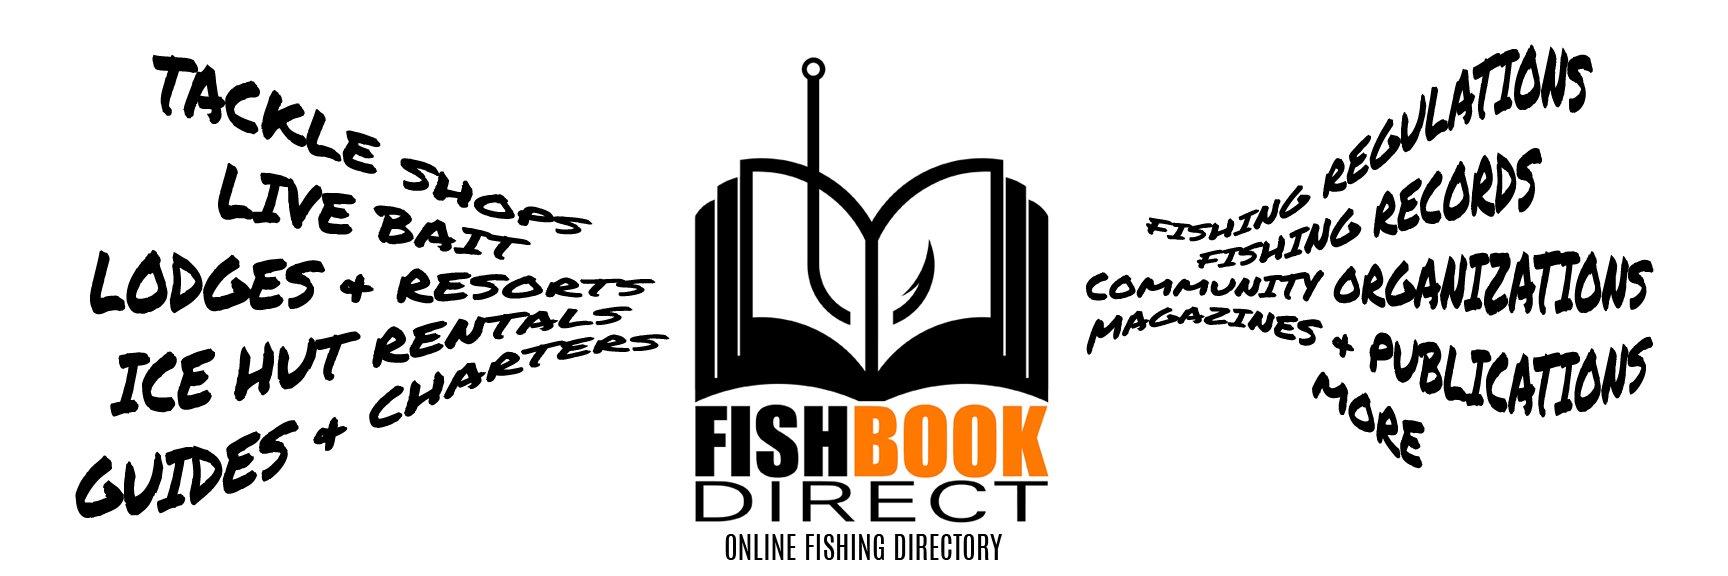 FISHBOOK DIRECT - THE WORLD'S #1 ONLINE FISHING DIRECTORY